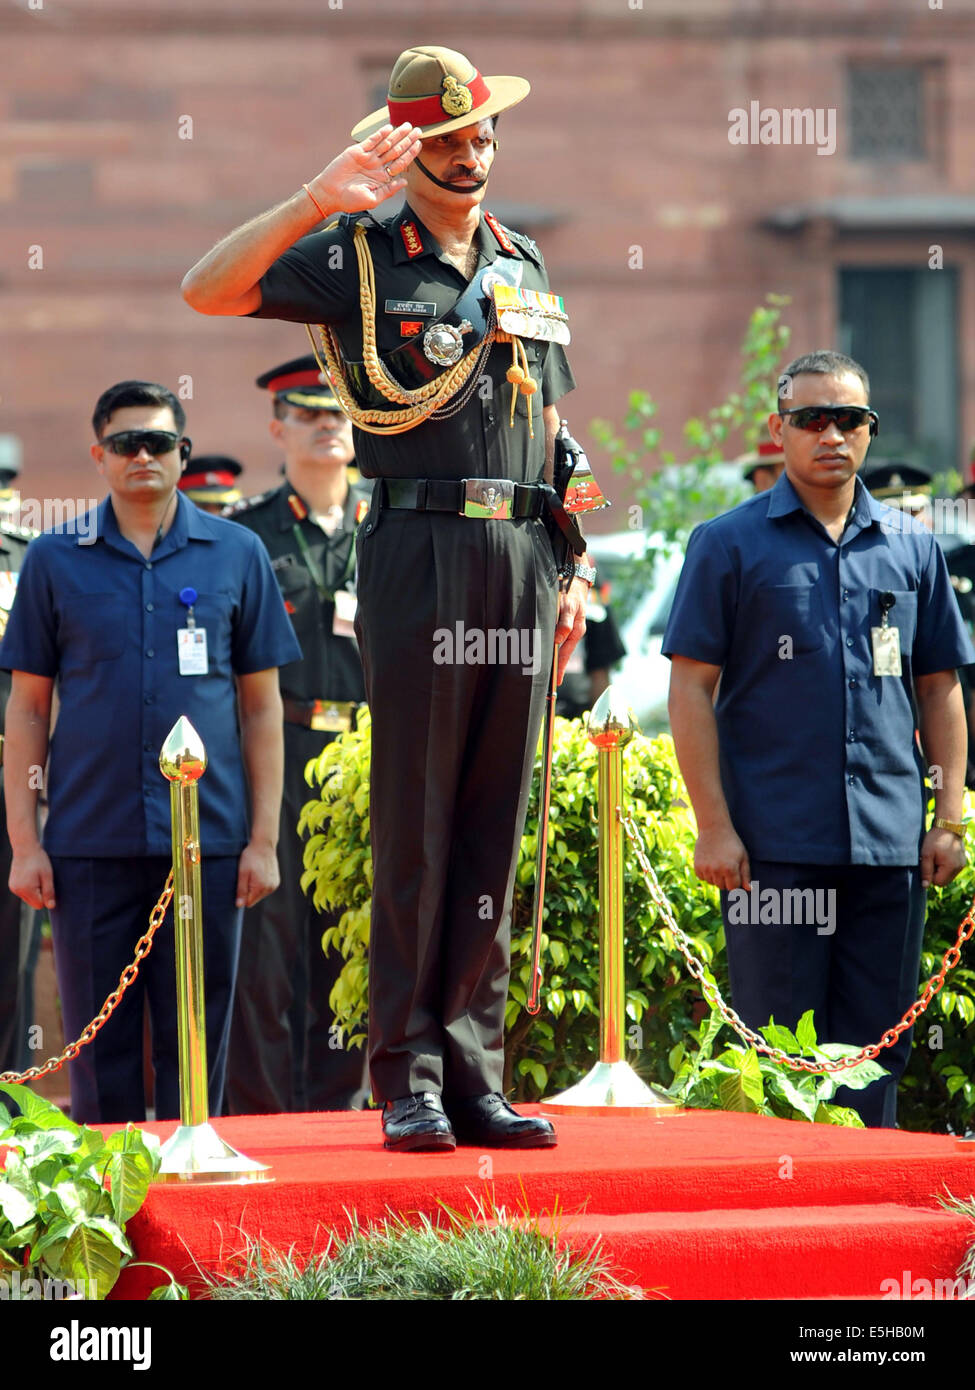 New Delhi. 1st Aug, 2014. General Dalbir Singh Suhag (L) takes the salute at a ceremony as he becomes the new Indian Army Chief at the lawn of Indian Defence Ministry at South Block in New Delhi on Aug. 1, 2014. © Partha Sarkar/Xinhua/Alamy Live News Stock Photo